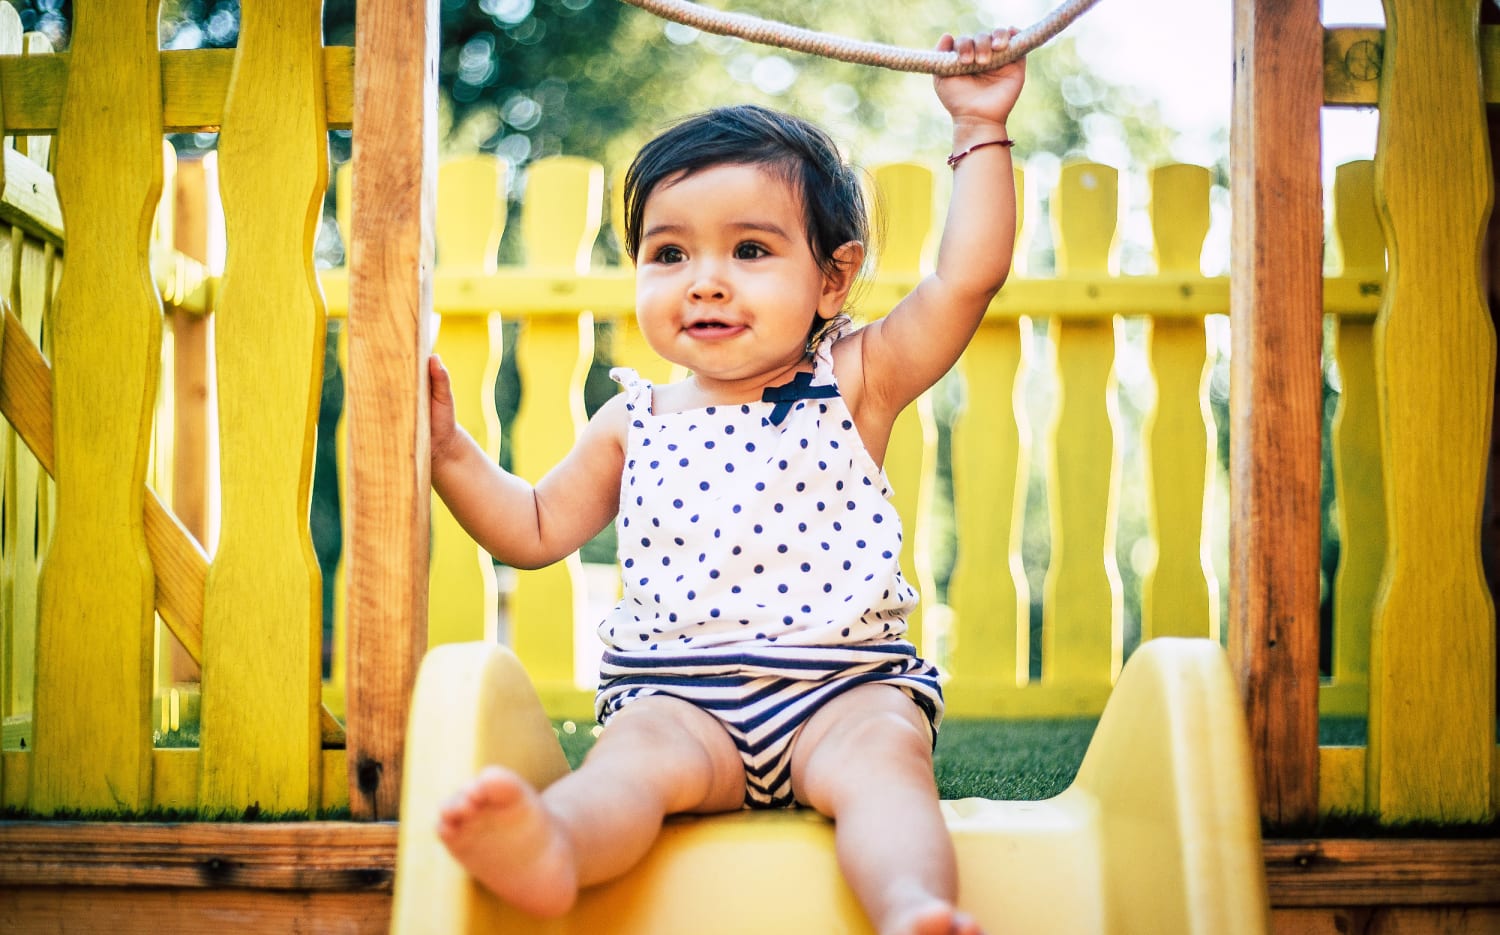 These are the top 200 old-fashioned baby girl names